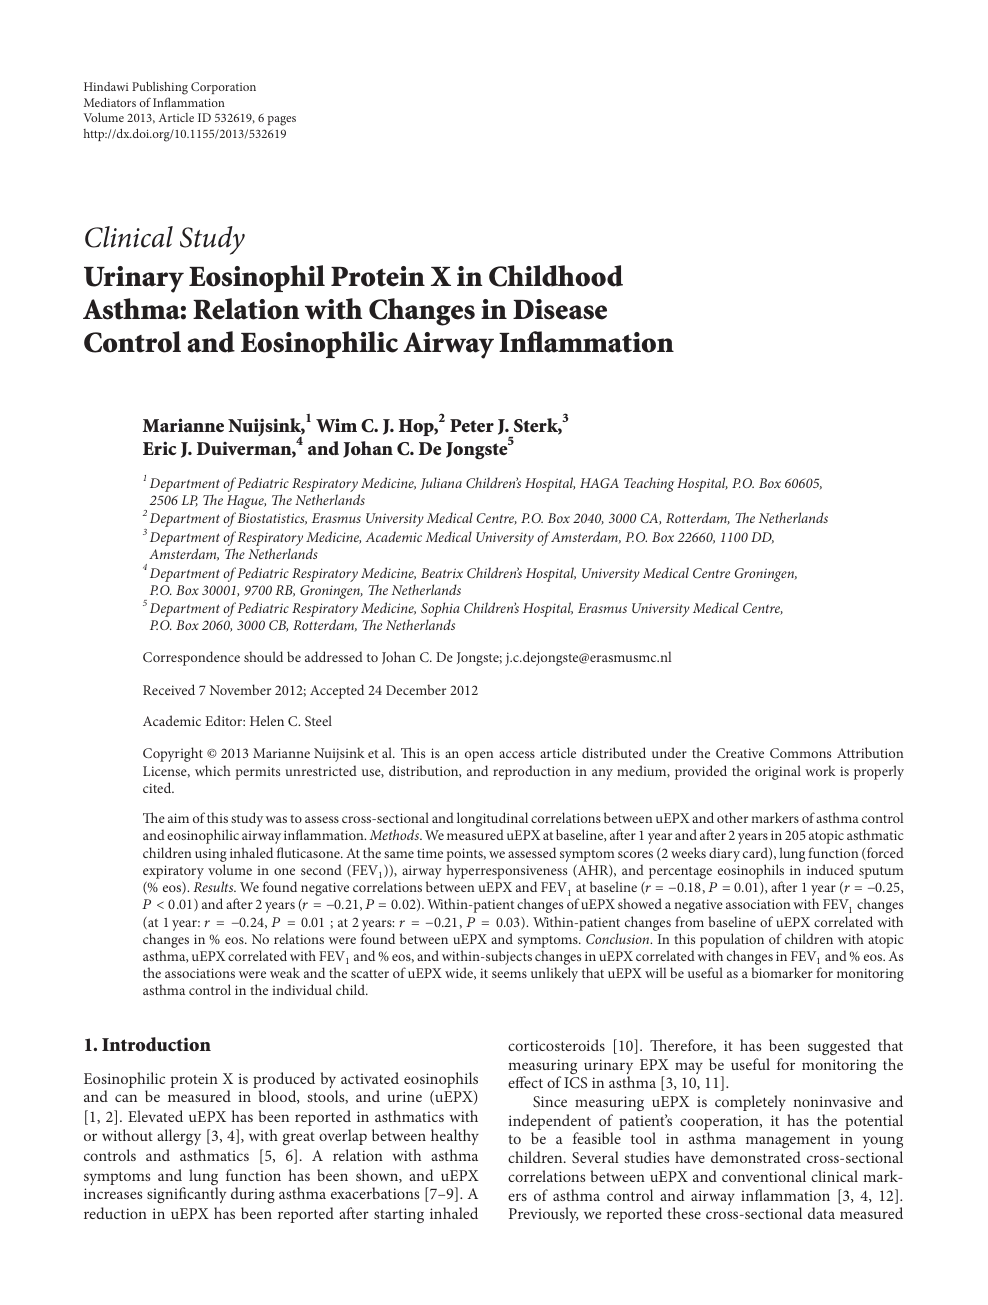 Urinary Eosinophil Protein X In Childhood Asthma Relation With Changes In Disease Control And Eosinophilic Airway Inflammation Topic Of Research Paper In Clinical Medicine Download Scholarly Article Pdf And Read For